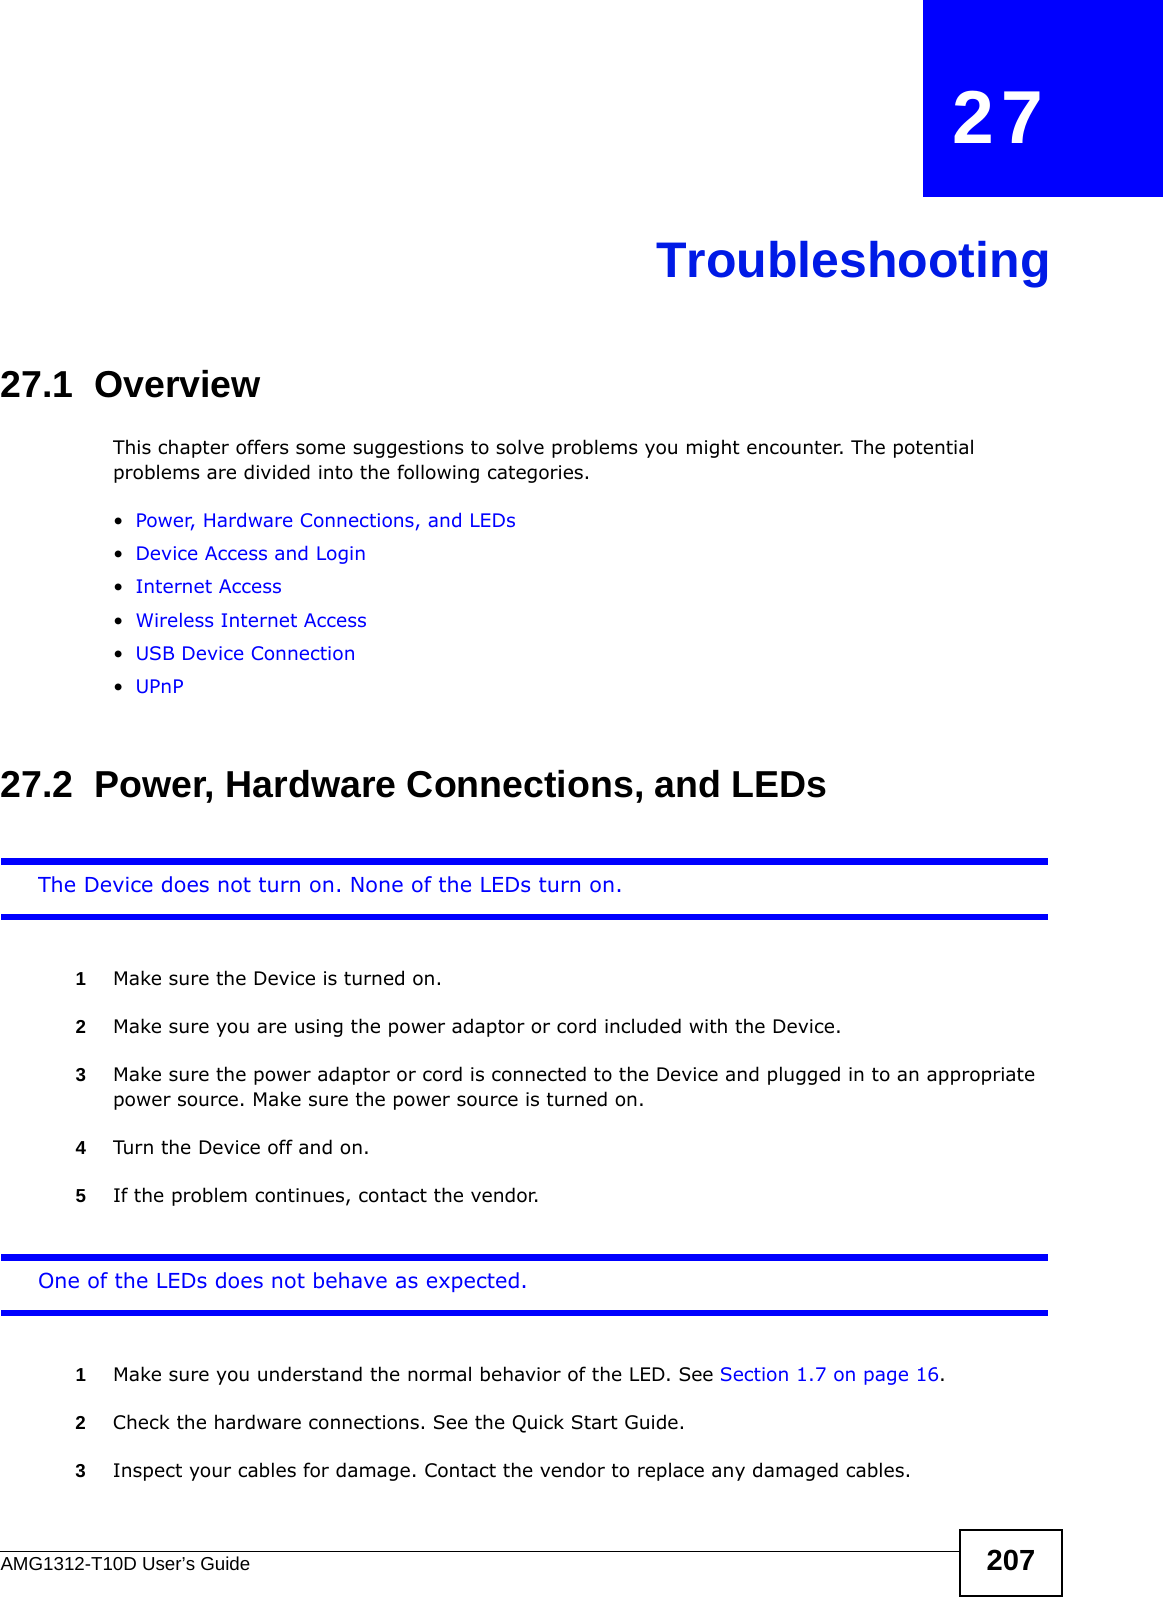 AMG1312-T10D User’s Guide 207CHAPTER   27Troubleshooting27.1  OverviewThis chapter offers some suggestions to solve problems you might encounter. The potential problems are divided into the following categories. •Power, Hardware Connections, and LEDs•Device Access and Login•Internet Access•Wireless Internet Access•USB Device Connection•UPnP27.2  Power, Hardware Connections, and LEDsThe Device does not turn on. None of the LEDs turn on.1Make sure the Device is turned on. 2Make sure you are using the power adaptor or cord included with the Device.3Make sure the power adaptor or cord is connected to the Device and plugged in to an appropriate power source. Make sure the power source is turned on.4Turn the Device off and on. 5If the problem continues, contact the vendor.One of the LEDs does not behave as expected.1Make sure you understand the normal behavior of the LED. See Section 1.7 on page 16.2Check the hardware connections. See the Quick Start Guide. 3Inspect your cables for damage. Contact the vendor to replace any damaged cables.